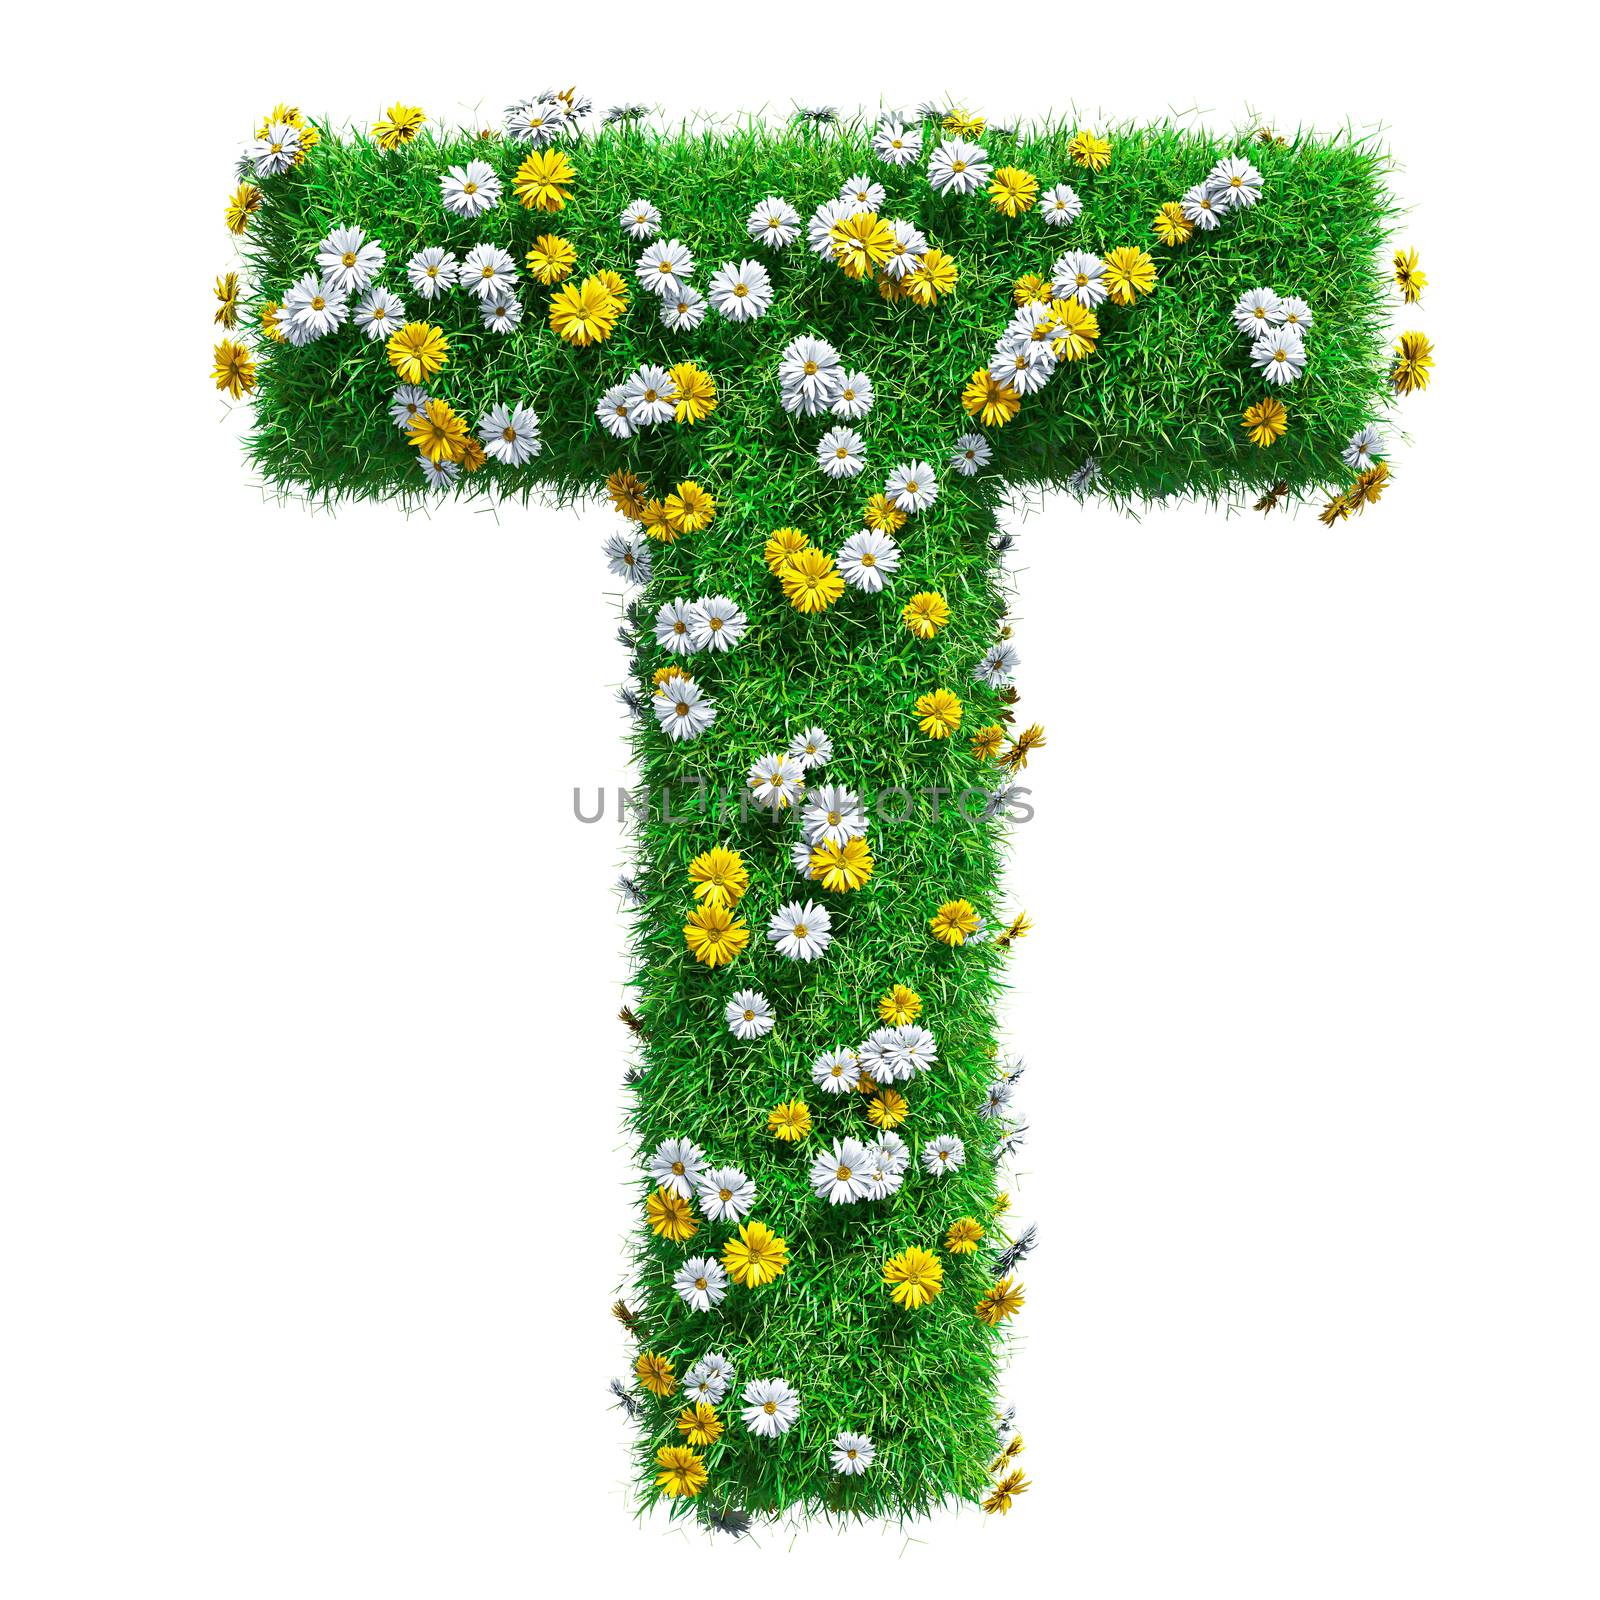 Letter T Of Green Grass And Flowers. Isolated On White Background. Font For Your Design. 3D Illustration